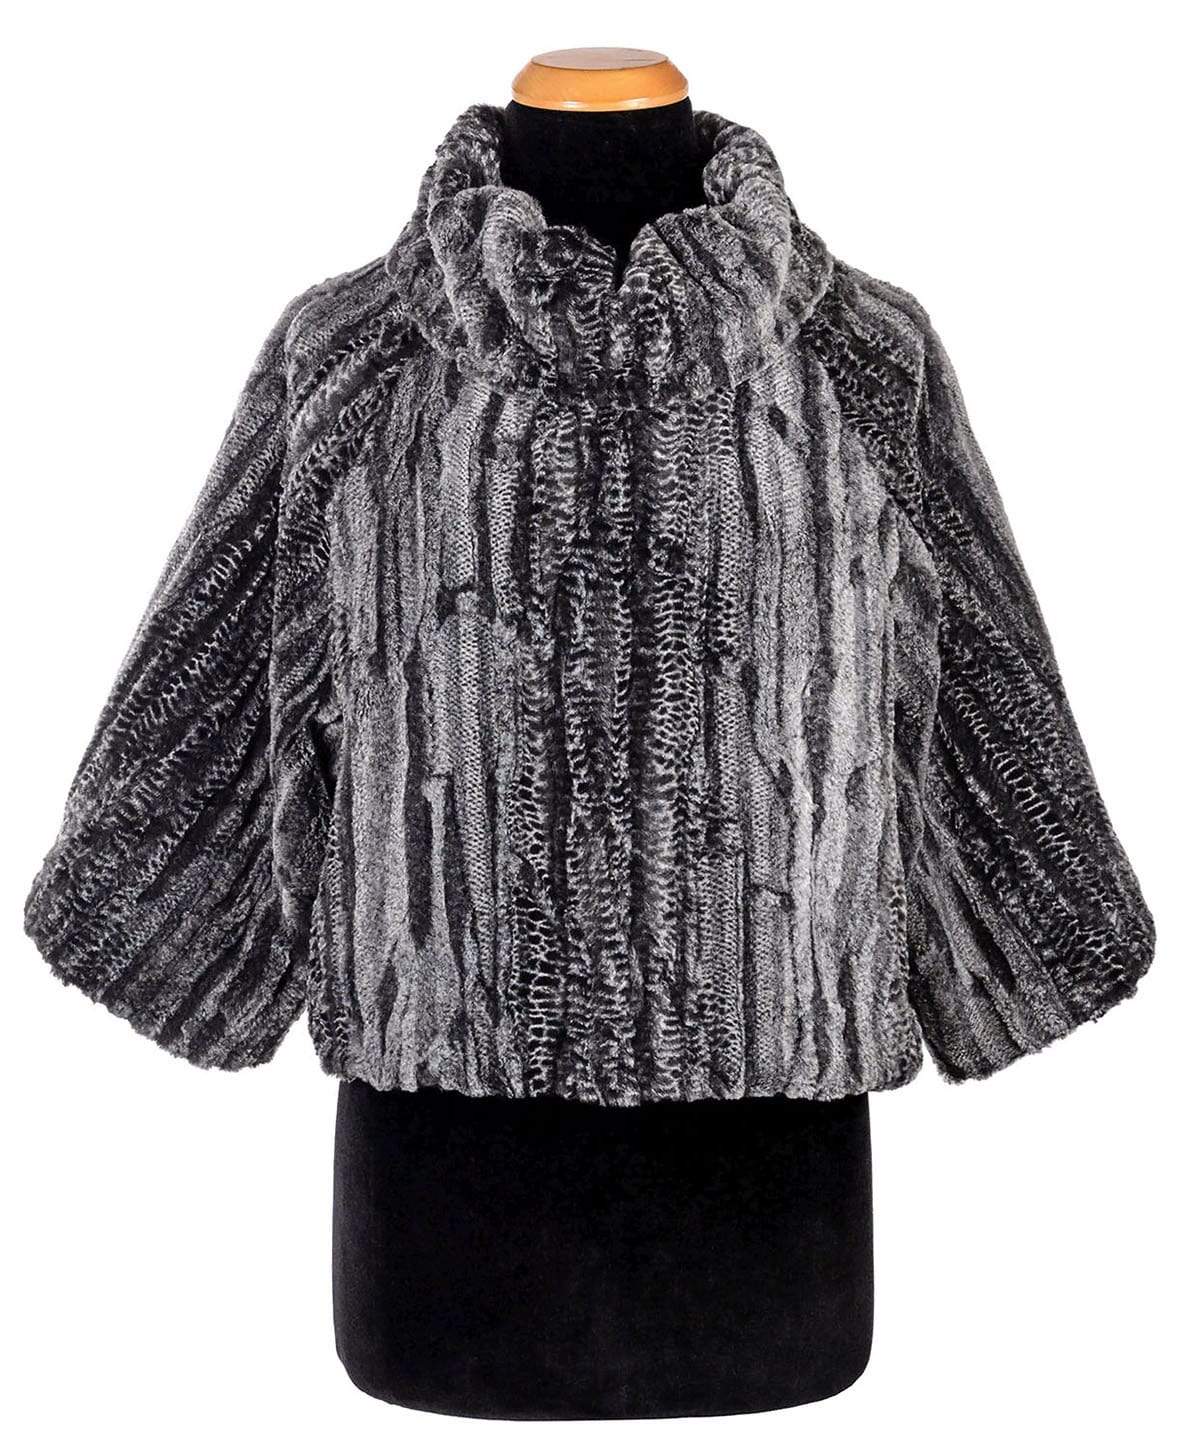 Sweater Top - Luxury Faux Fur in Rattle N Shake - Sold Out!